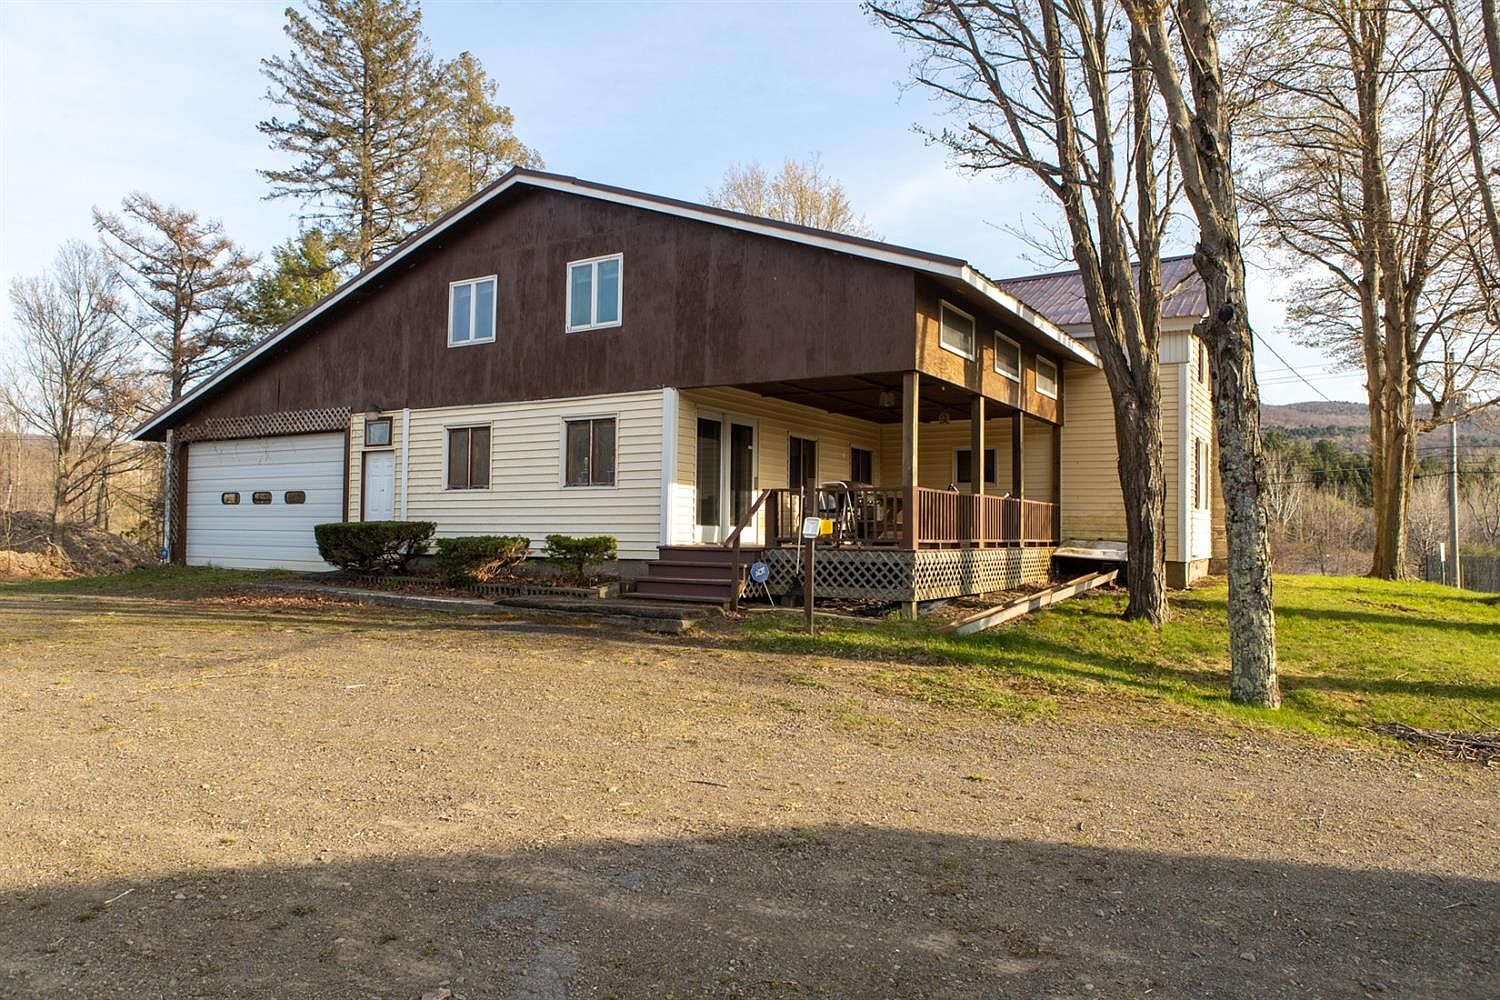 134 County Highway 11, Oneonta, NY 13820 | Zillow